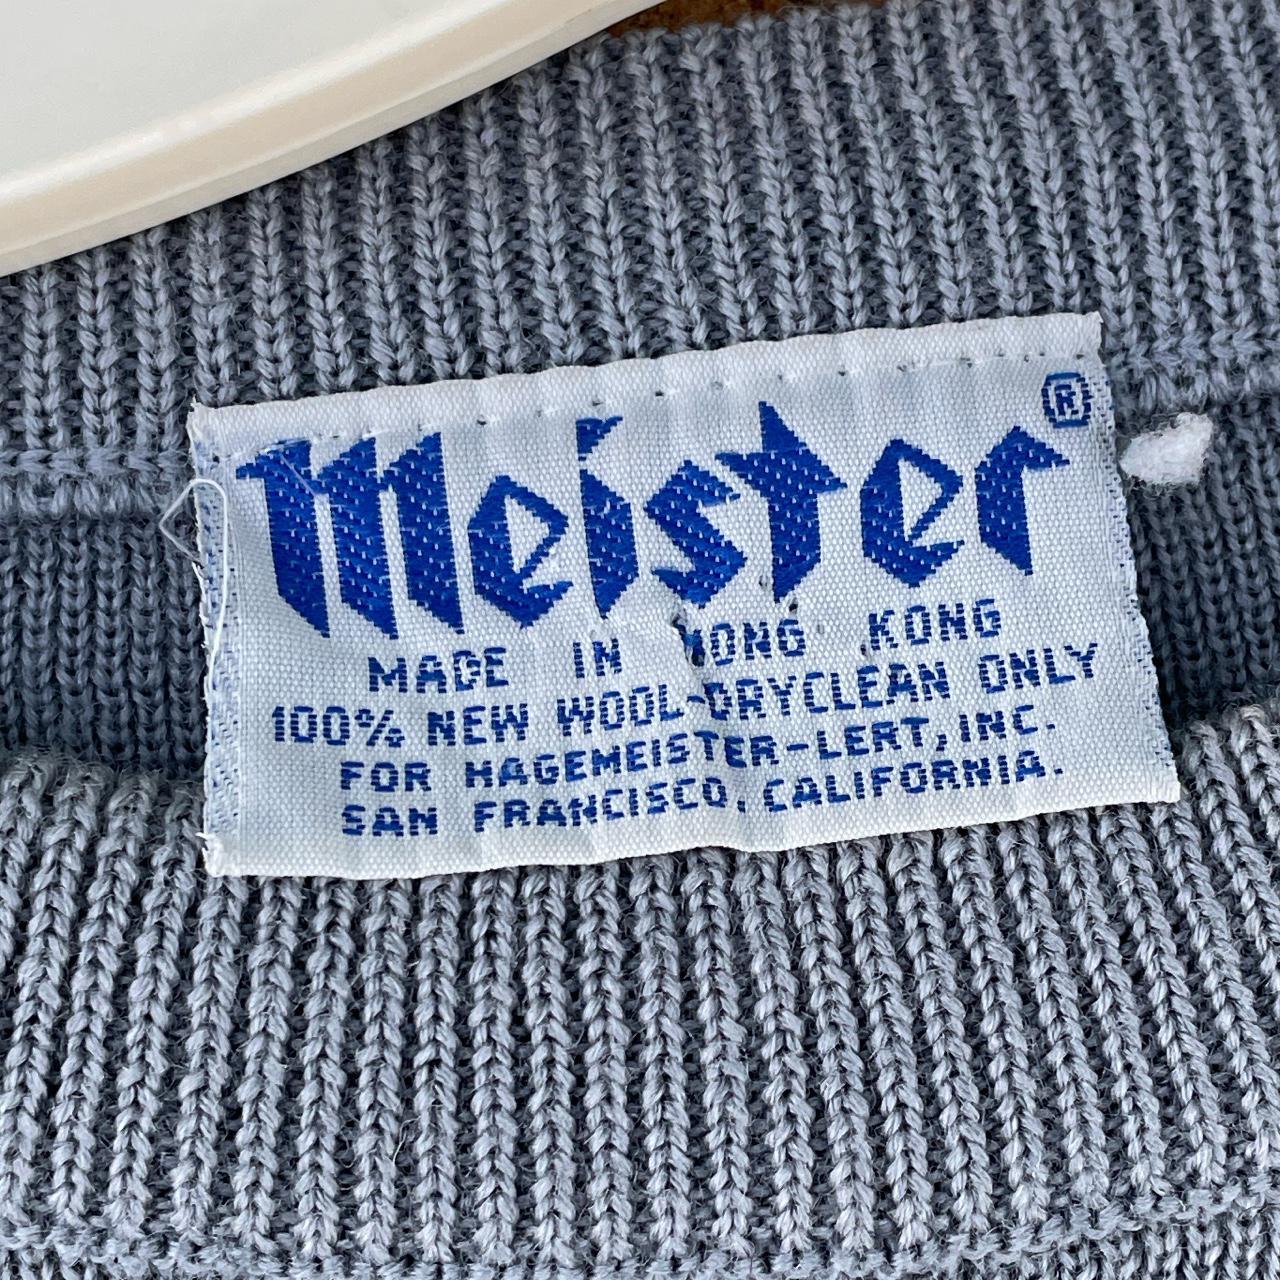 Product Image 3 - Vintage 80s Meister Sweater 🕺🏻

Size: